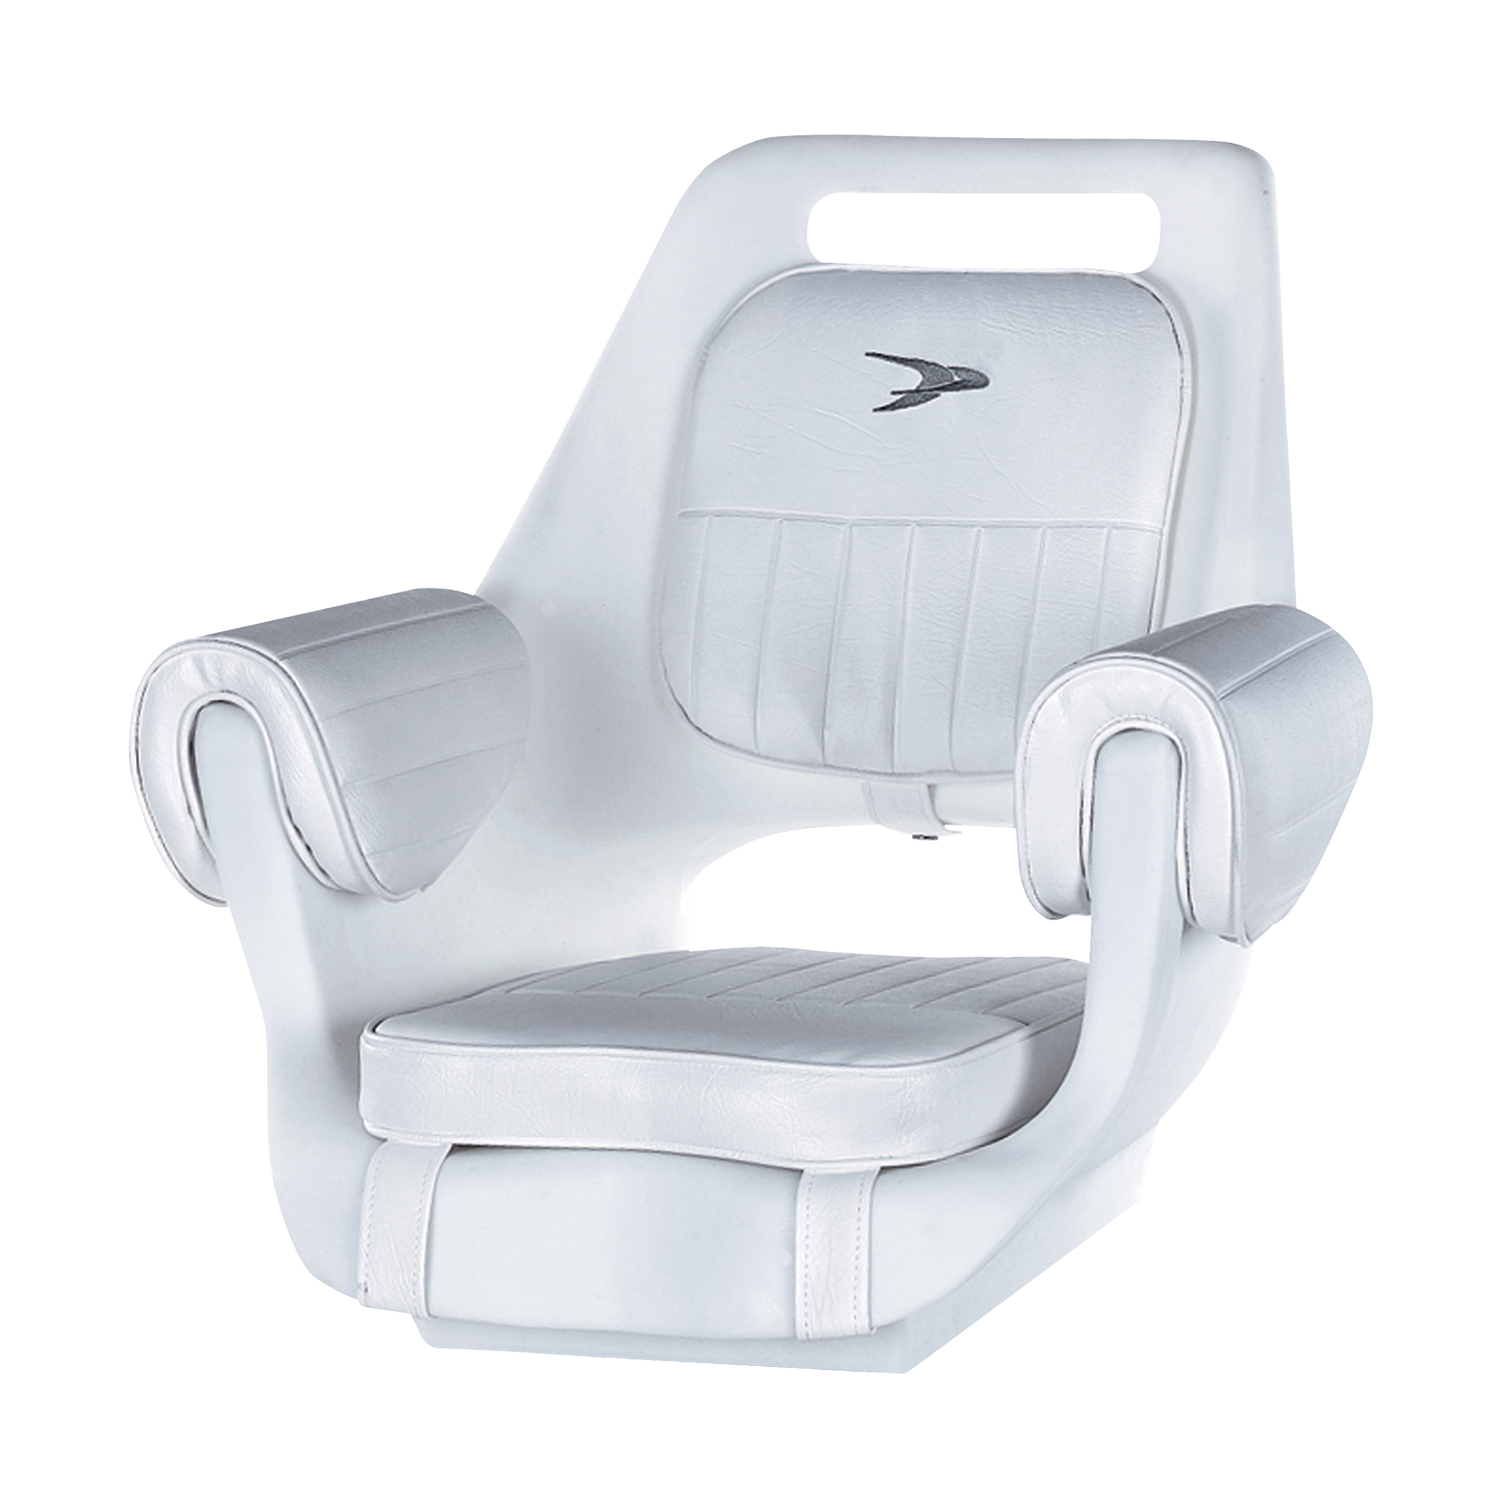 Wise 8WD007-3-710 Deluxe Boat Pilot Chair Seat and Mounting Plate - image 1 of 2